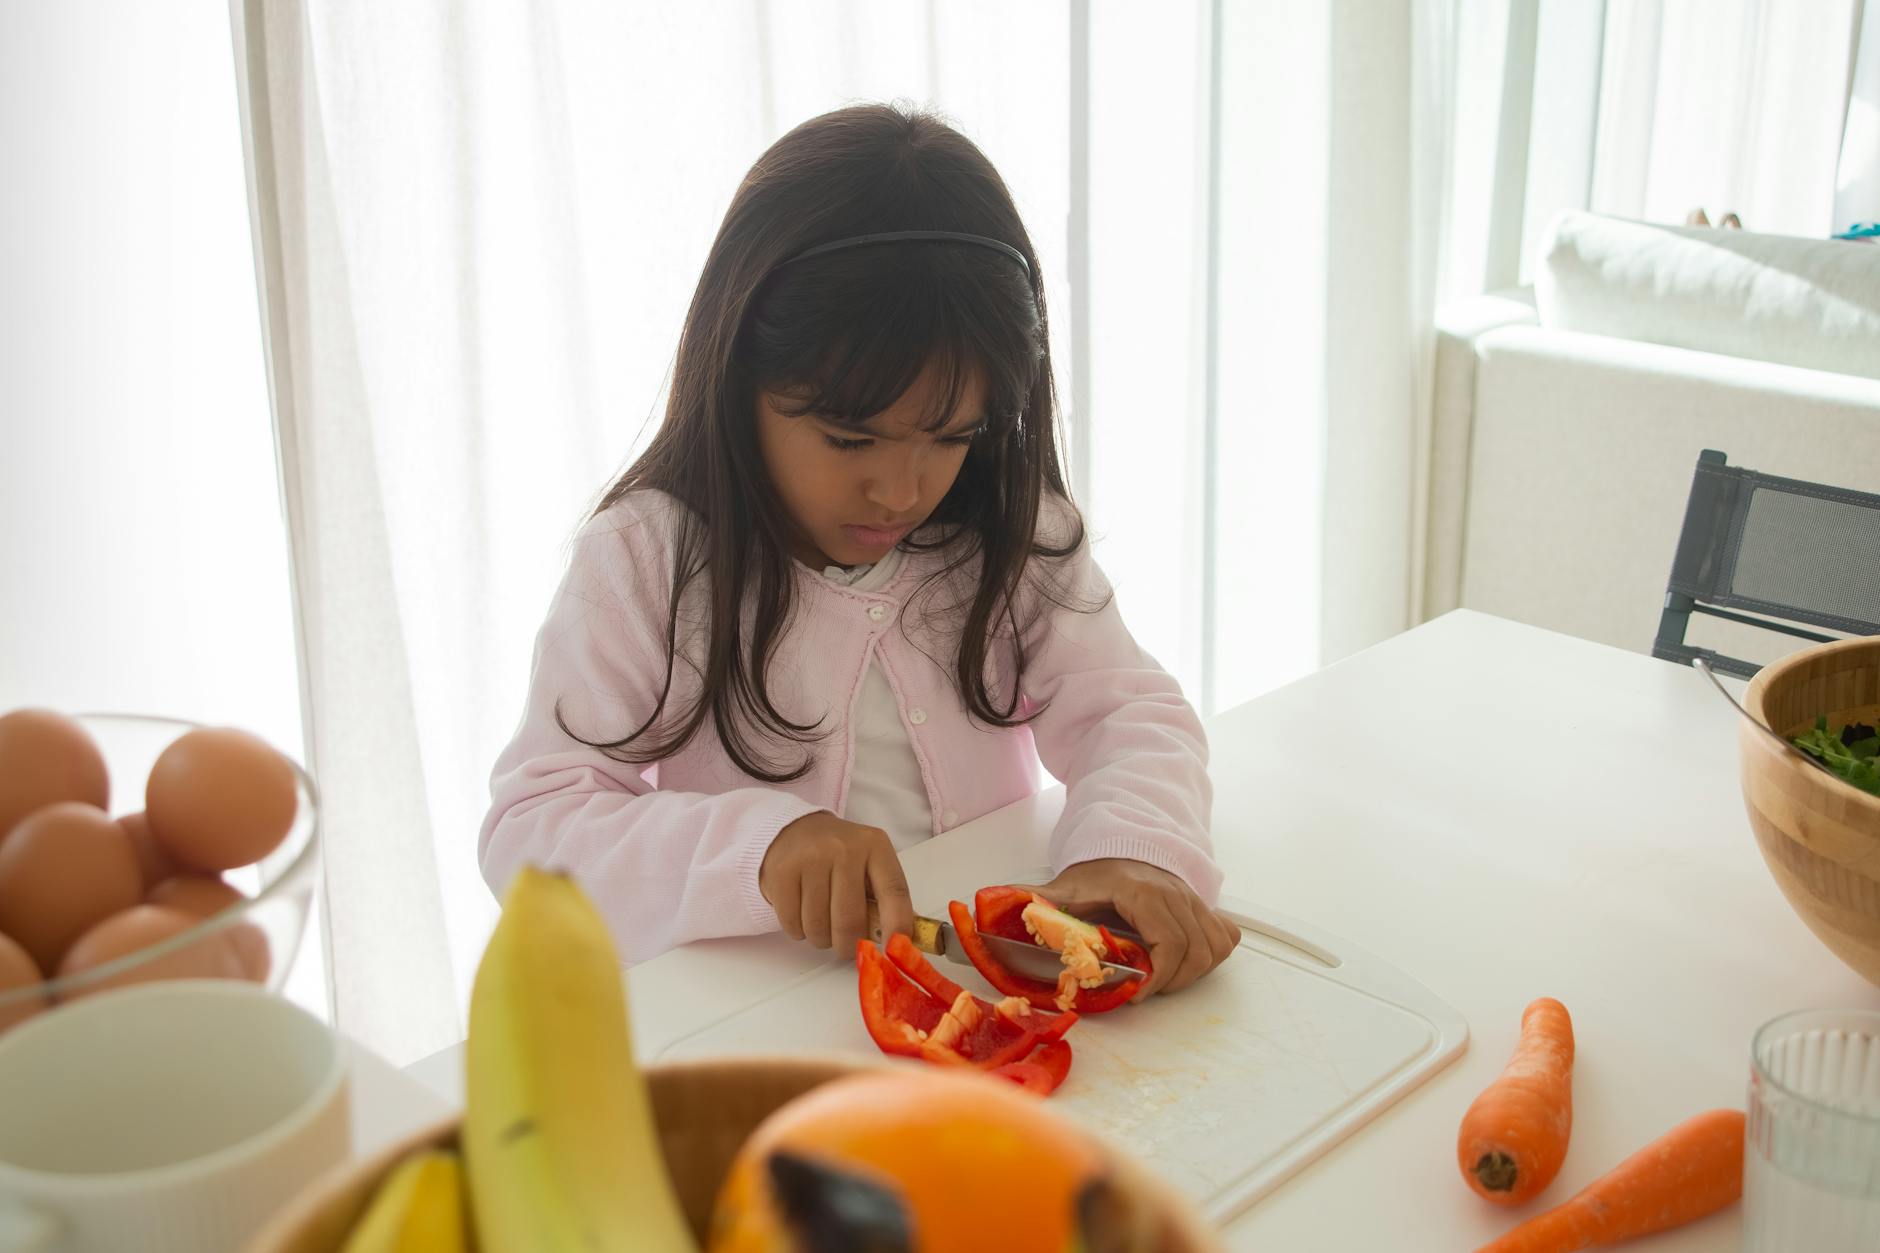 girl cutting red bell pepper using a knife